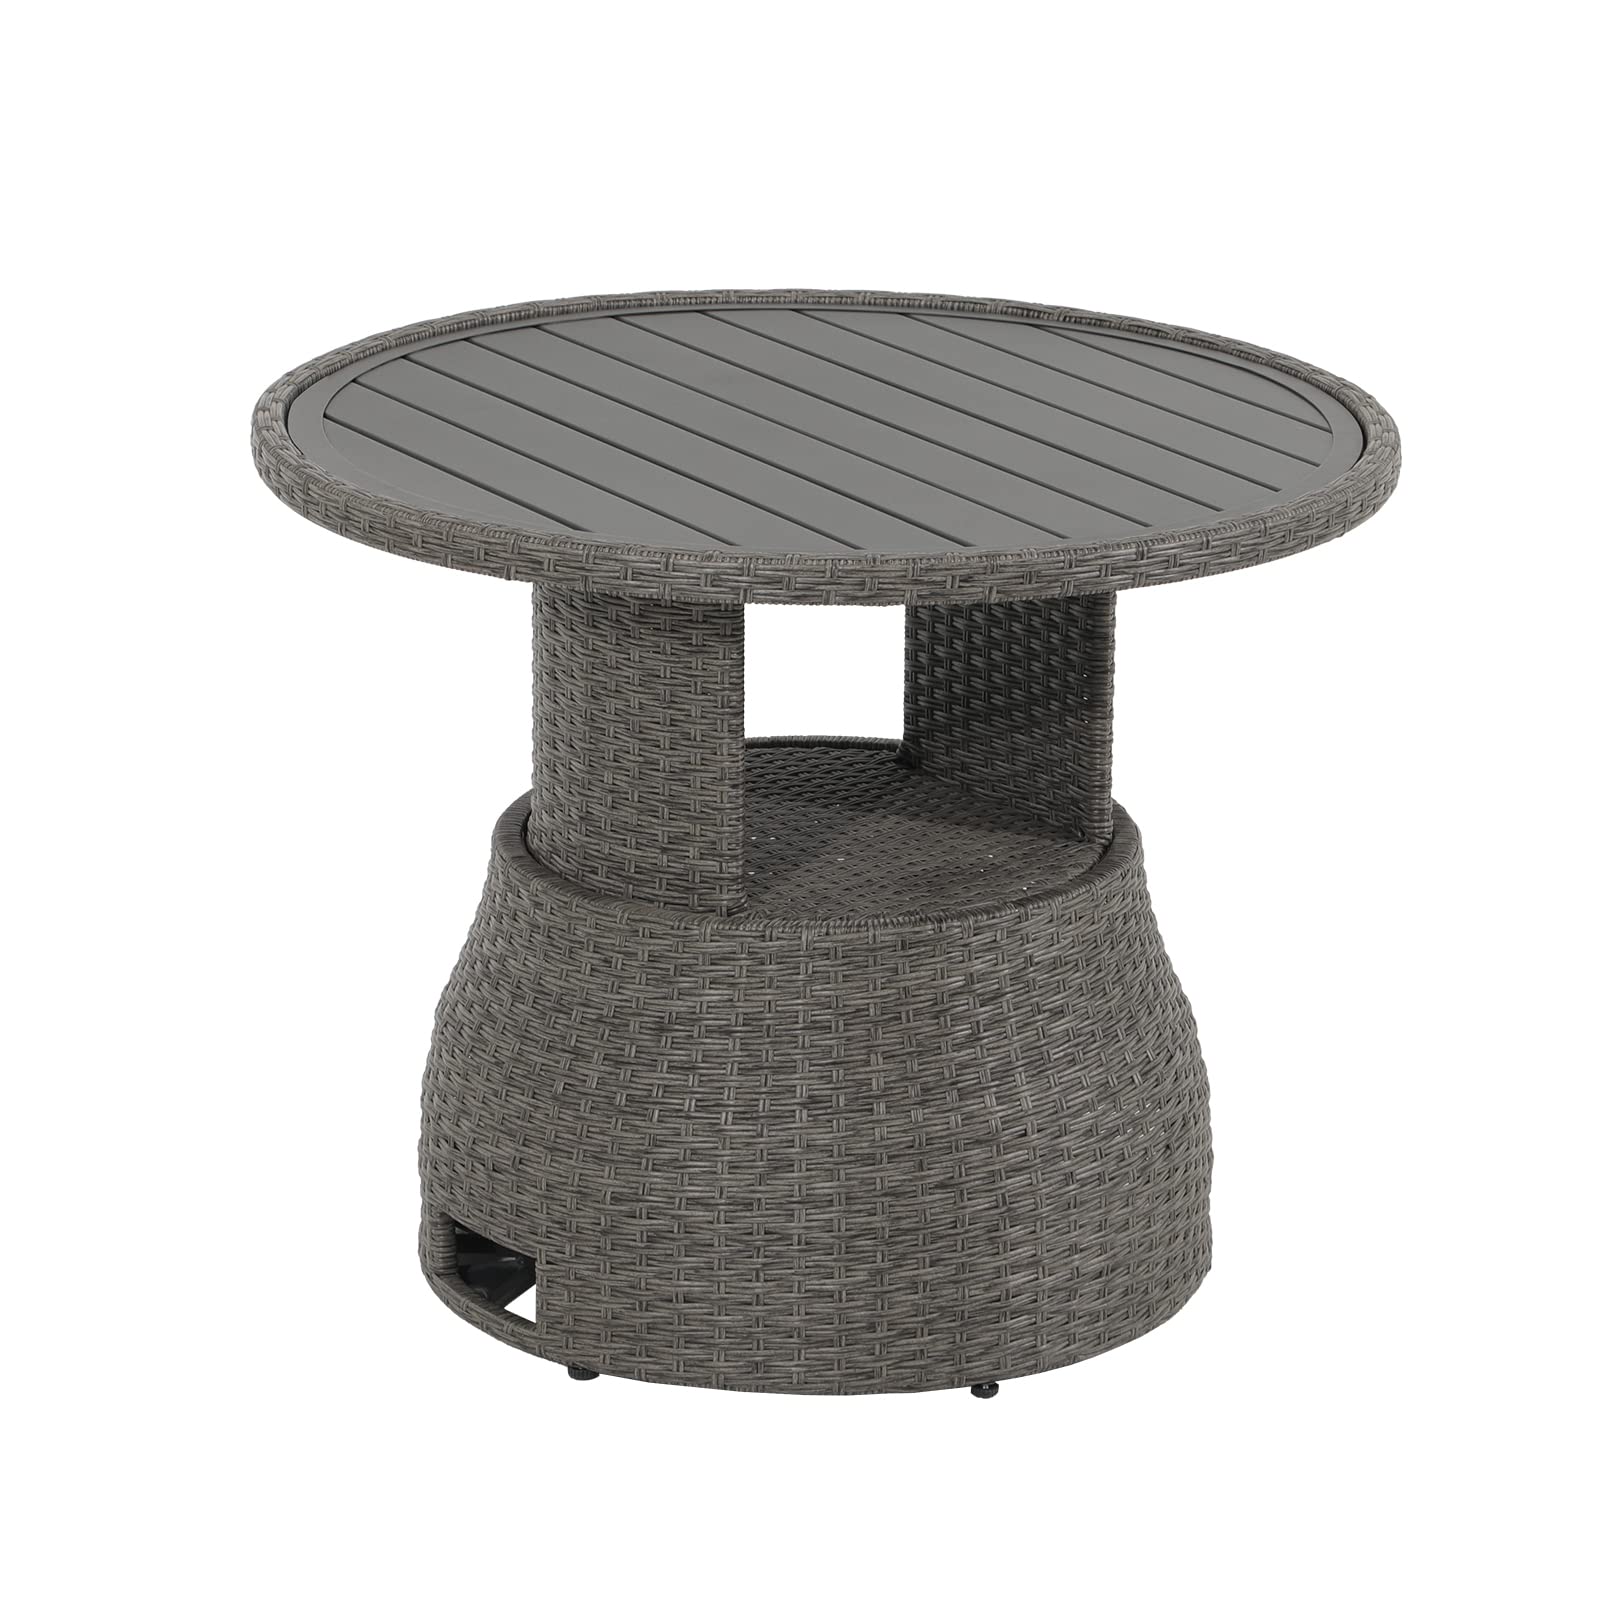 33in Wicker Dining Table, Outdoor Patio Lift Coffee Table, Round Side Table with Aluminum Tabletop, Grey